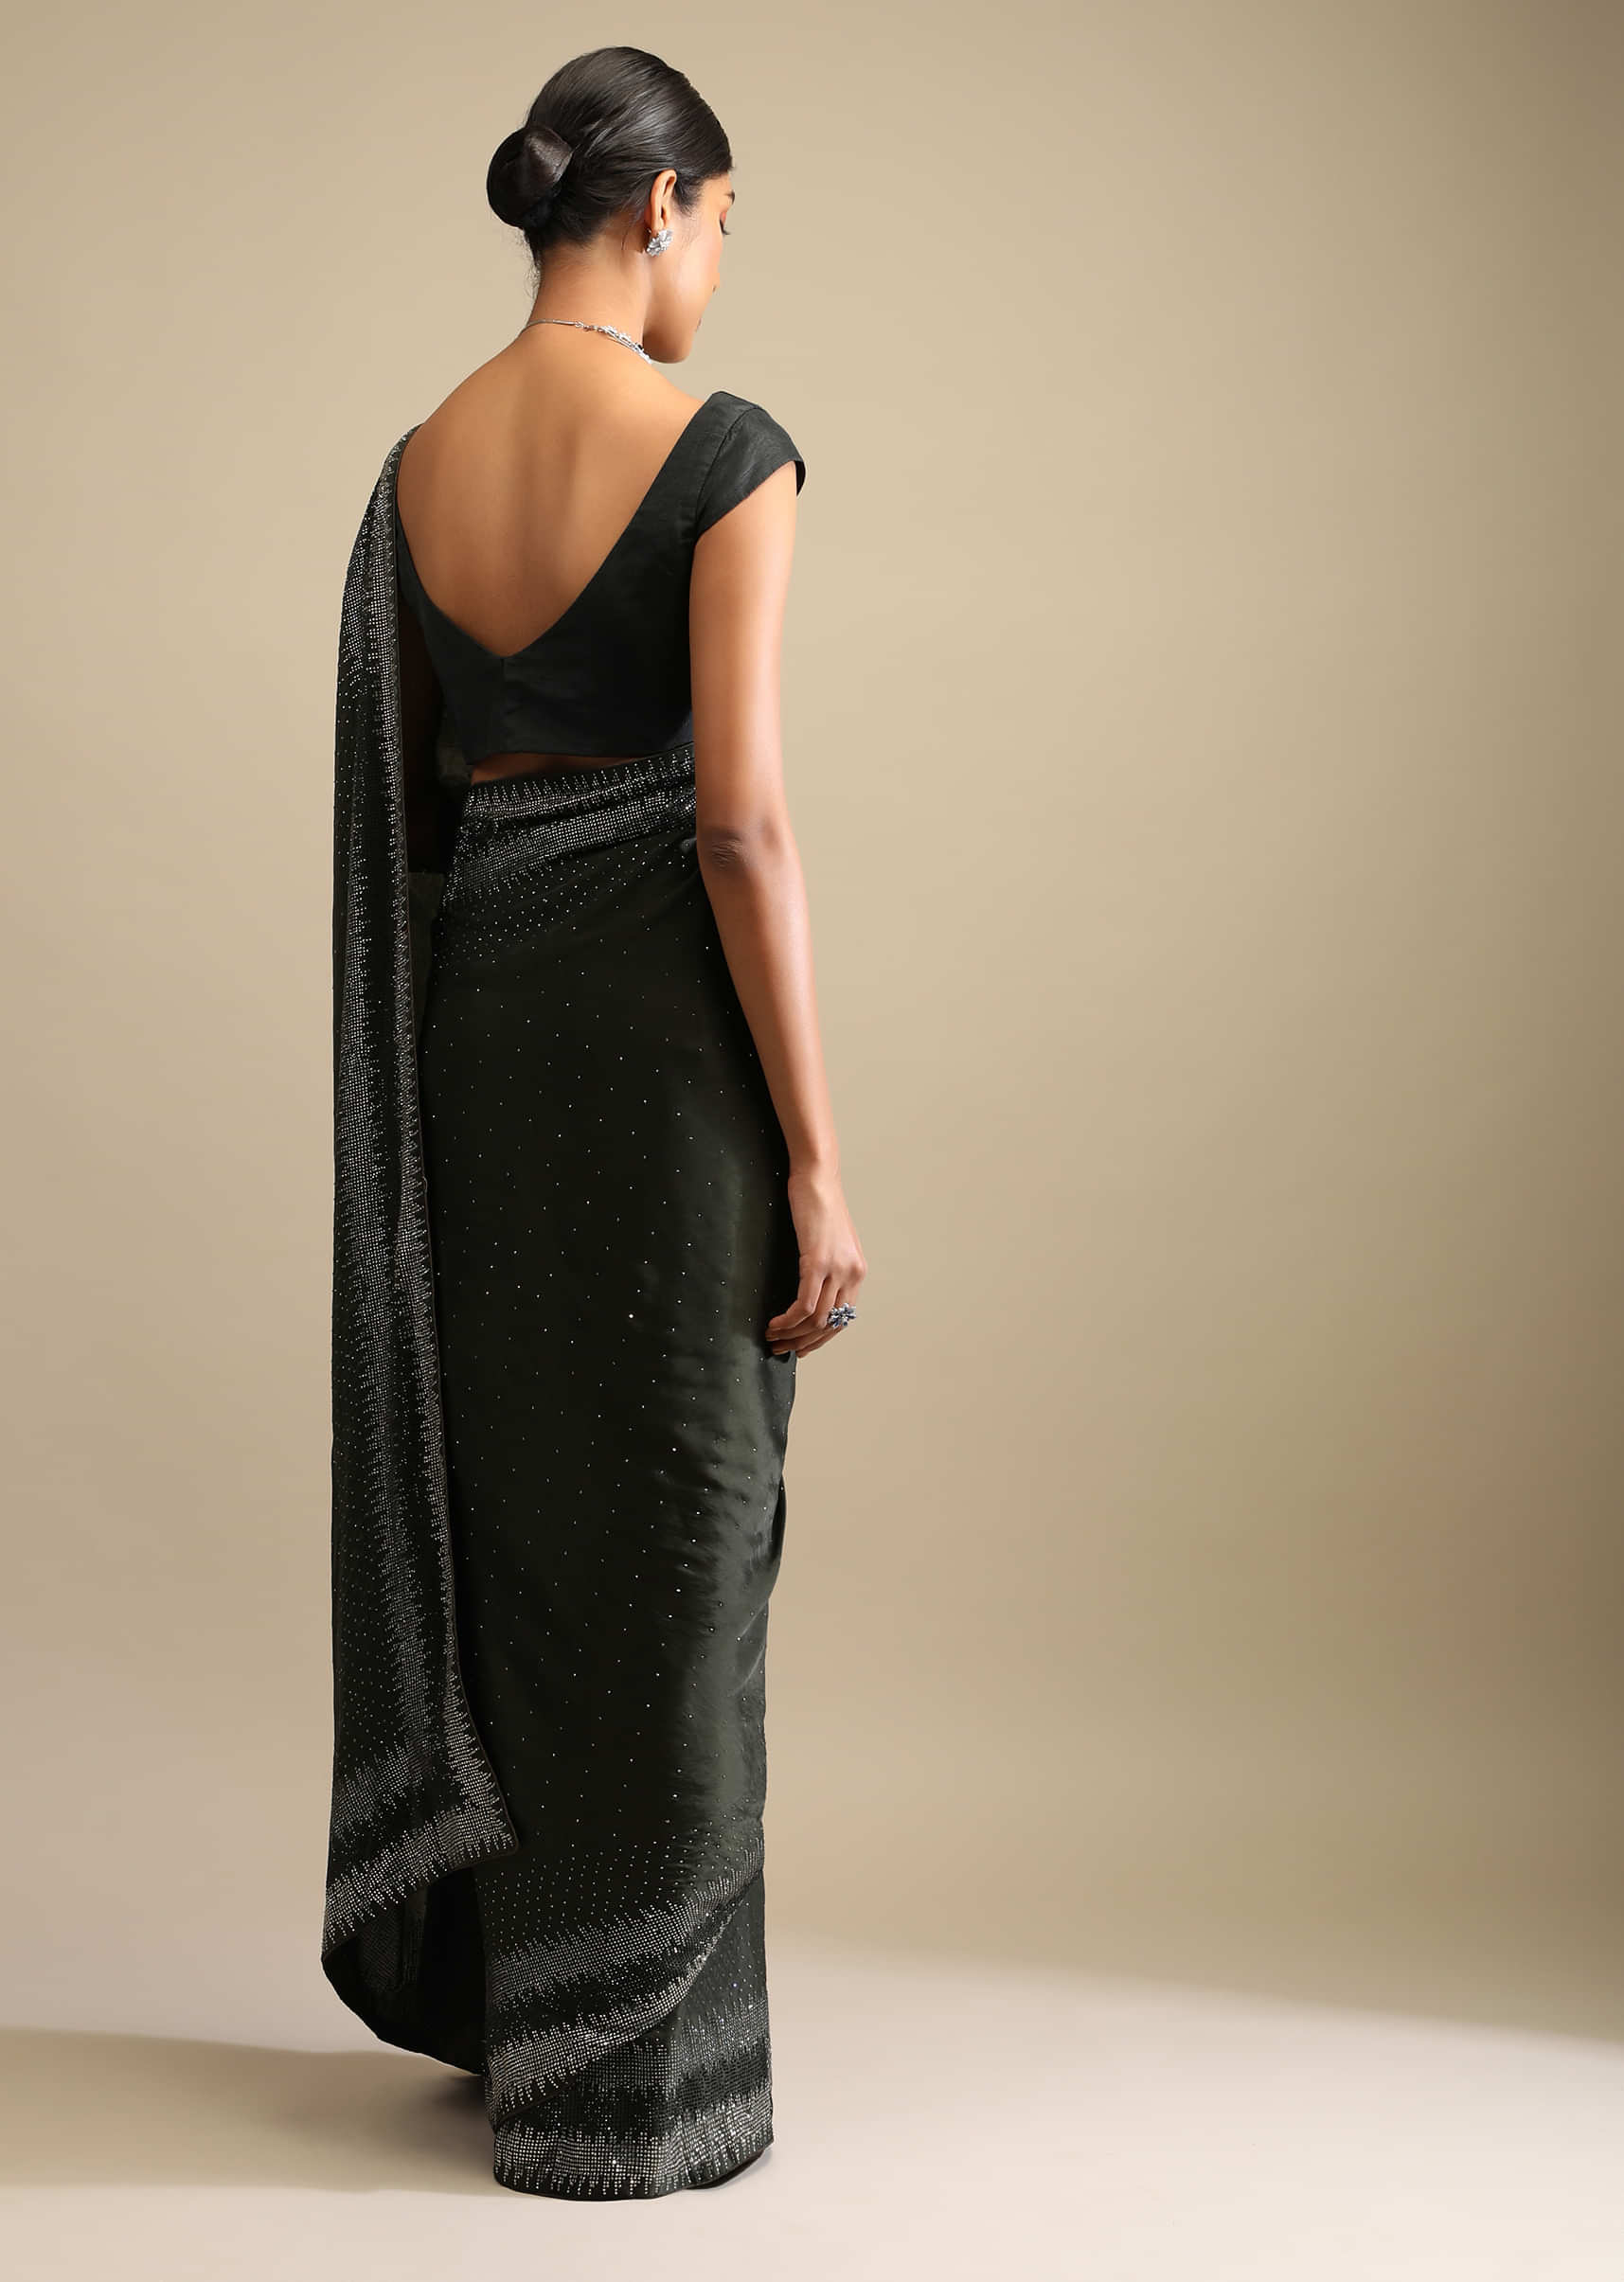 Shadow Green Saree In Satin With Scattered Sequins And Heavy Embellished Border  